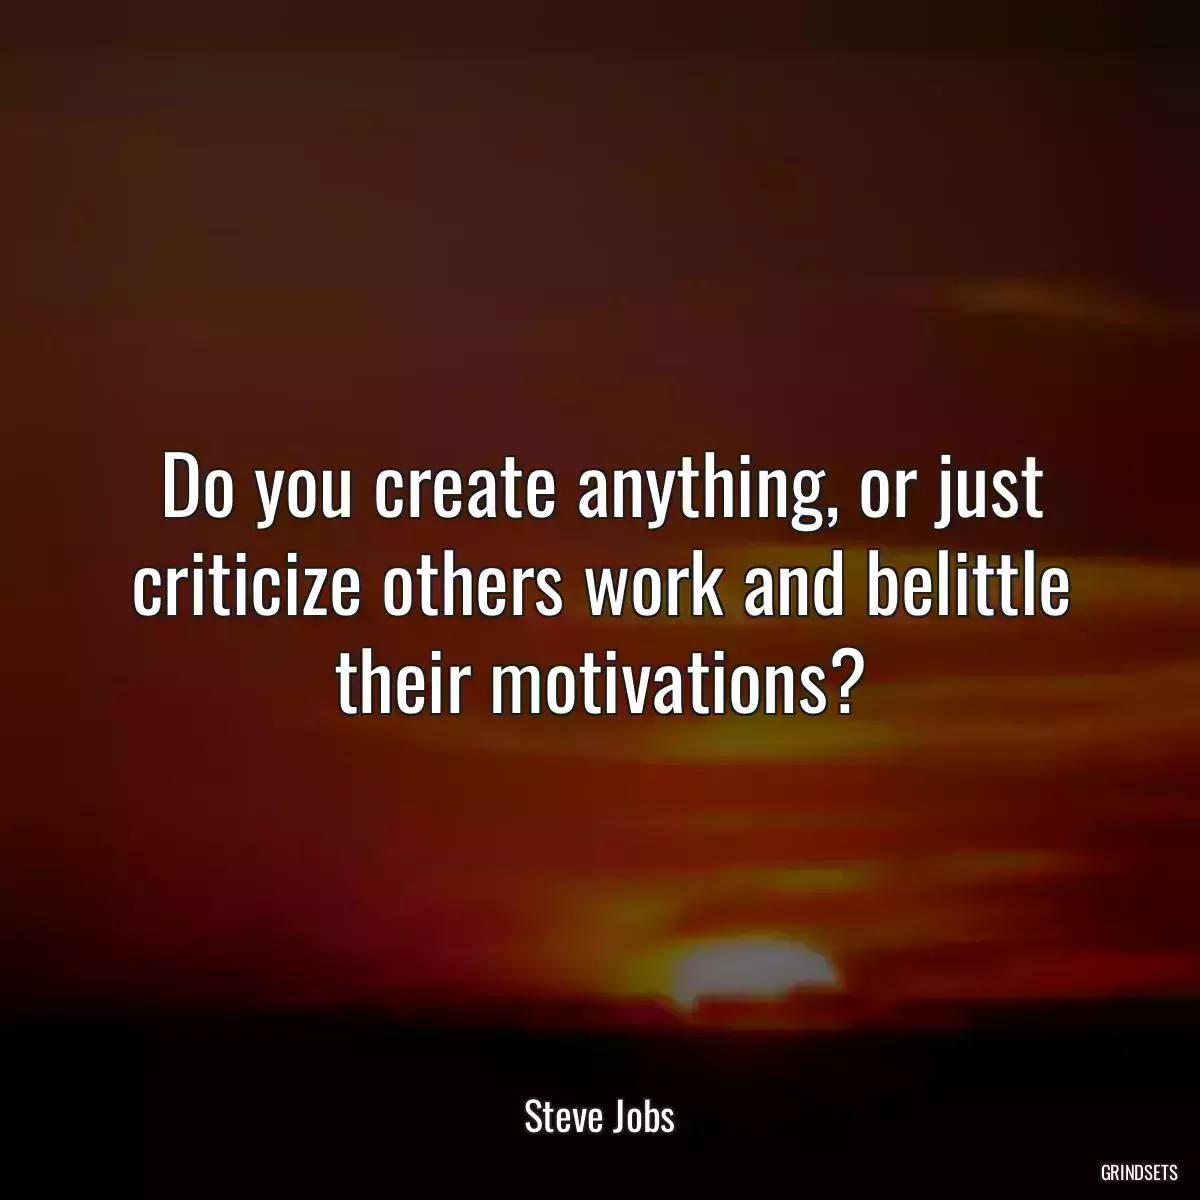 Do you create anything, or just criticize others work and belittle their motivations?